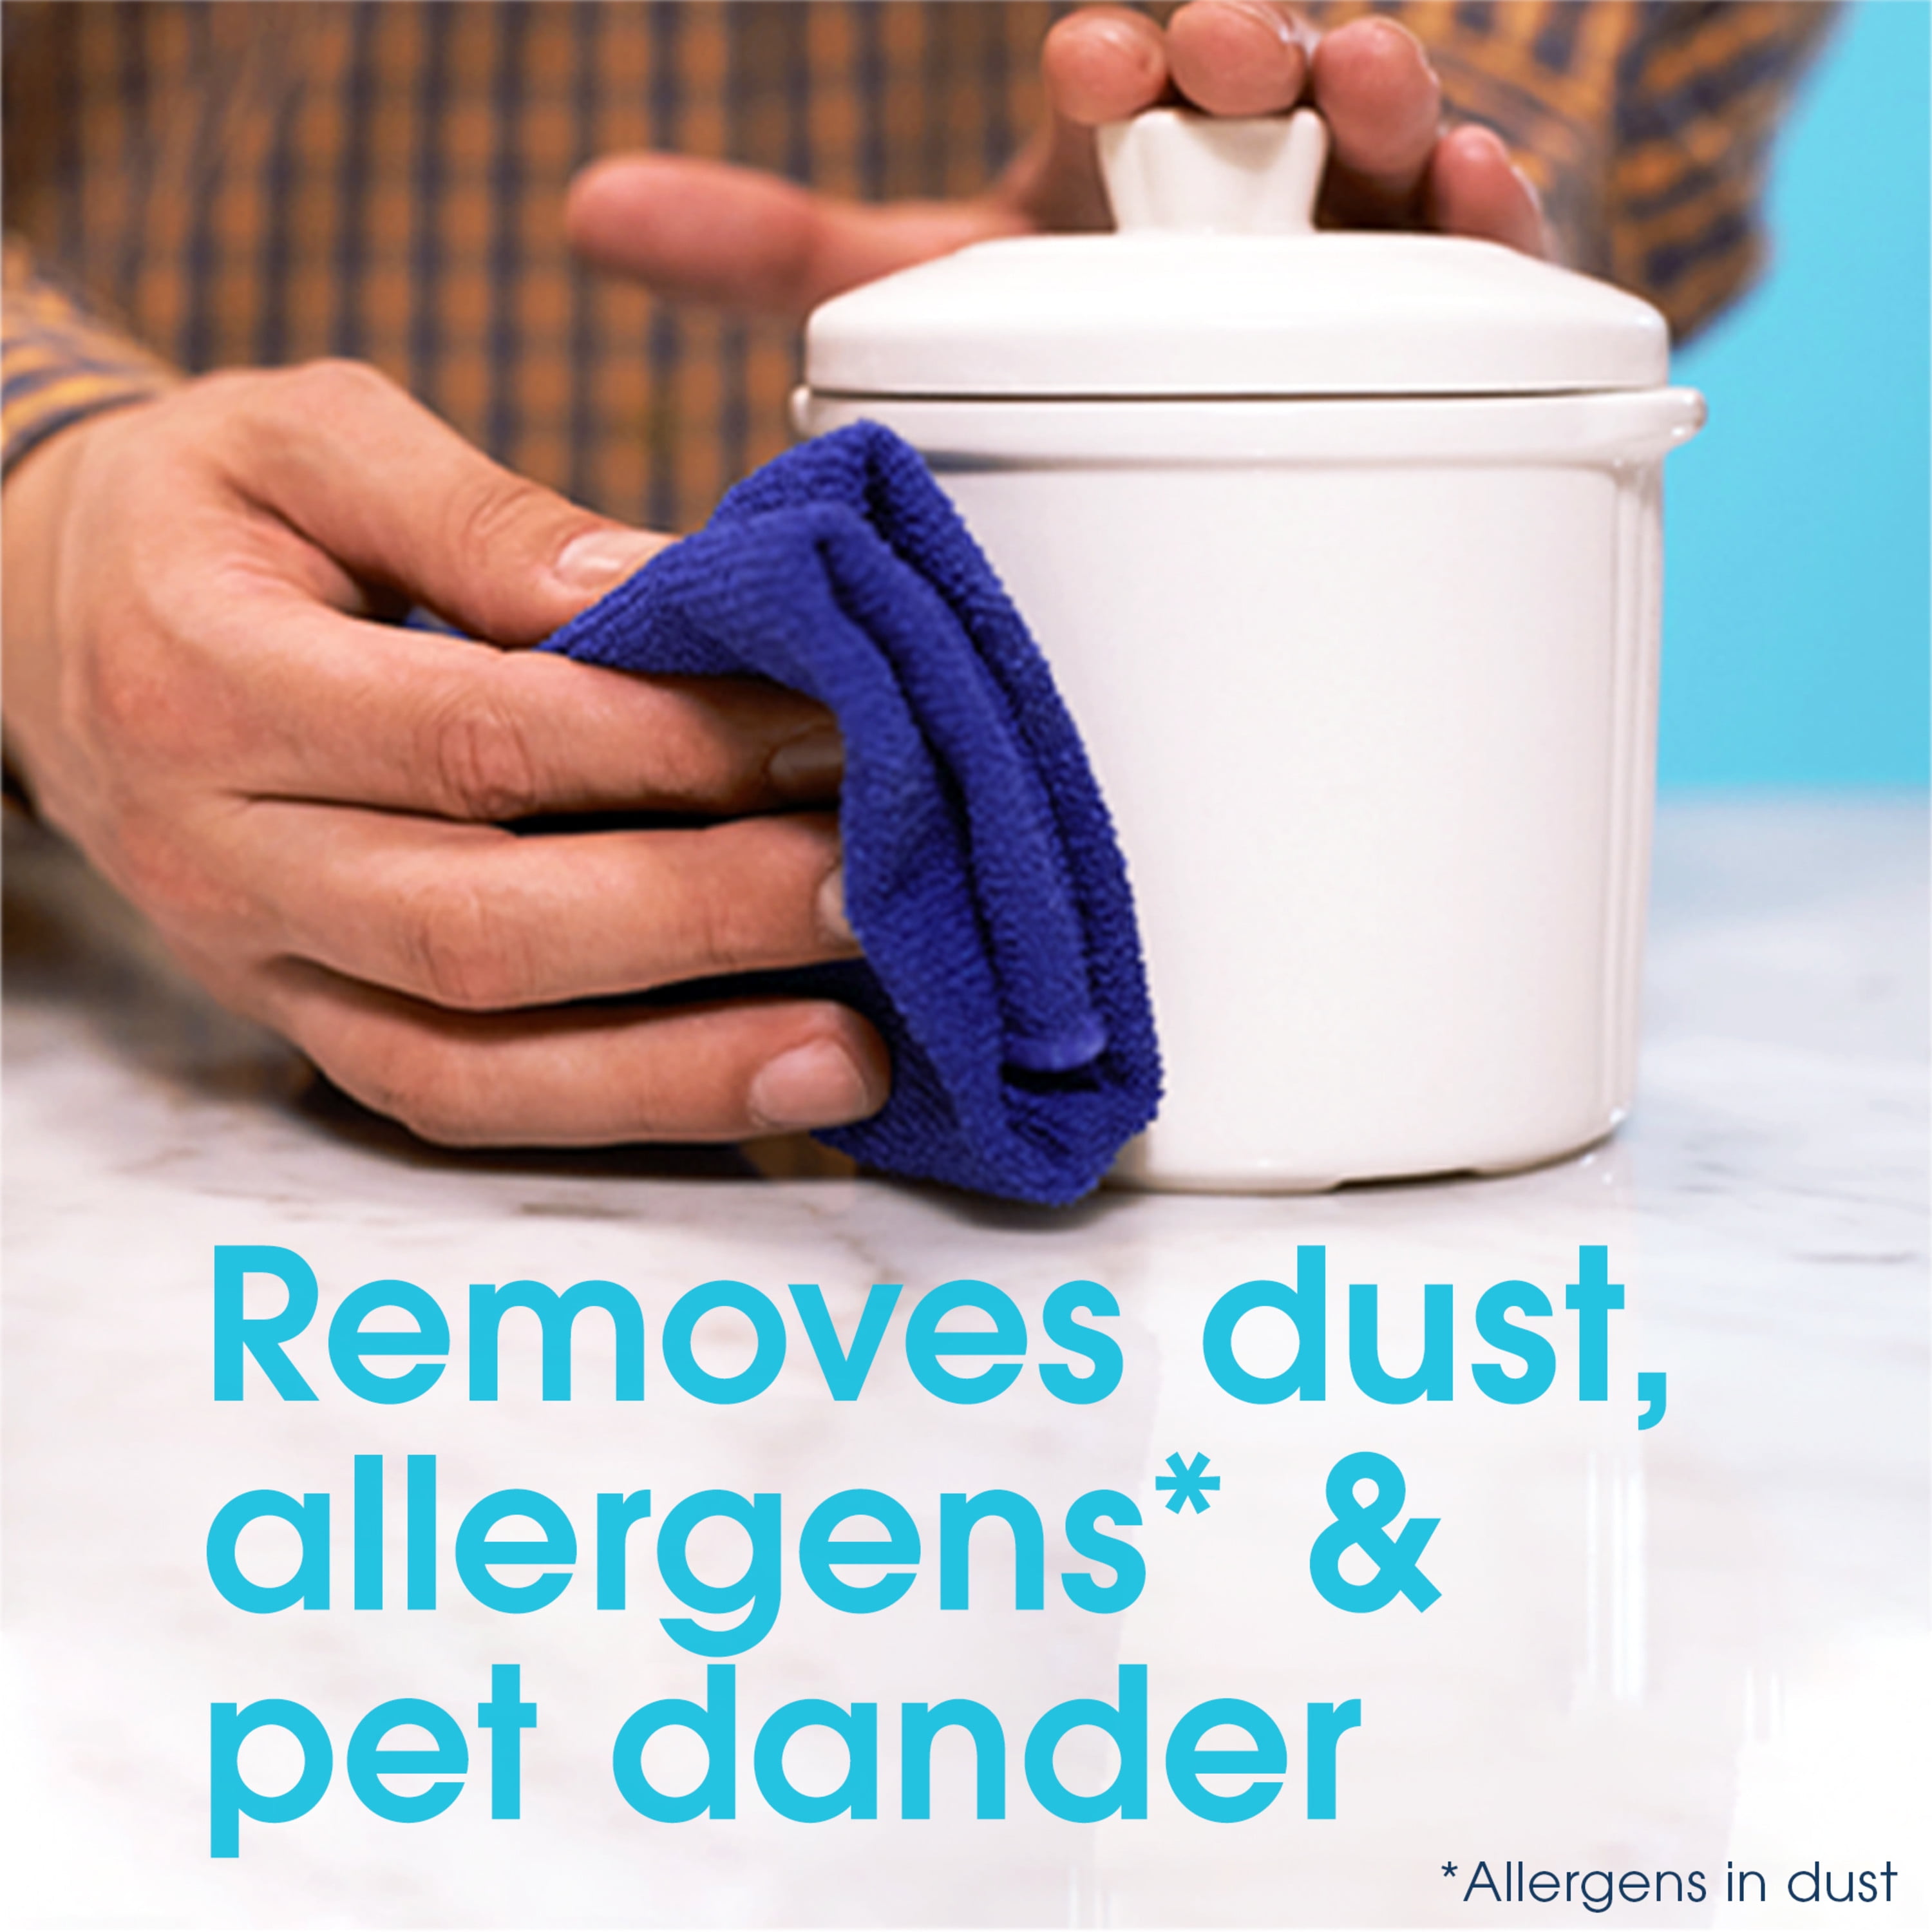 Pledge® GRAB-IT™ Dust & Allergen Dry Refill Cloths at Nationwide